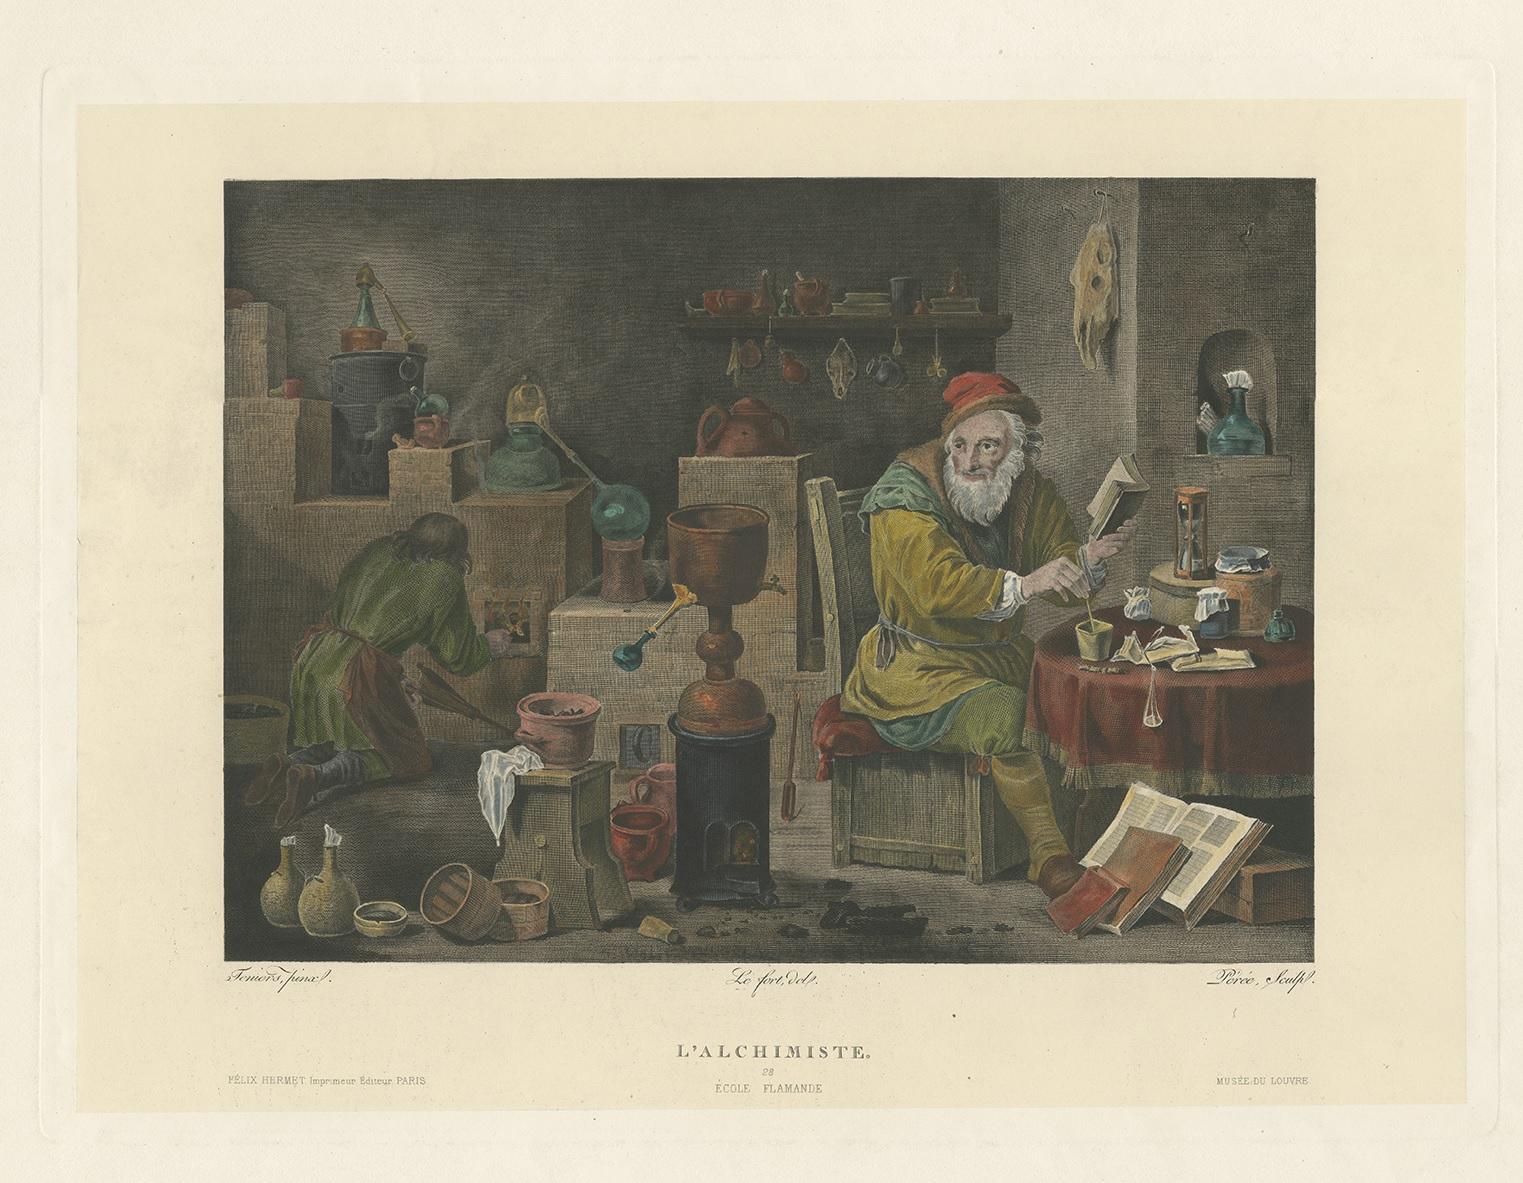 Antique print titled 'l'Alchimiste'. Large original antique print on chine collé of an alchemist in his laboratory. Engraved by Péree after a painting by Tenier. Published circa 1860.